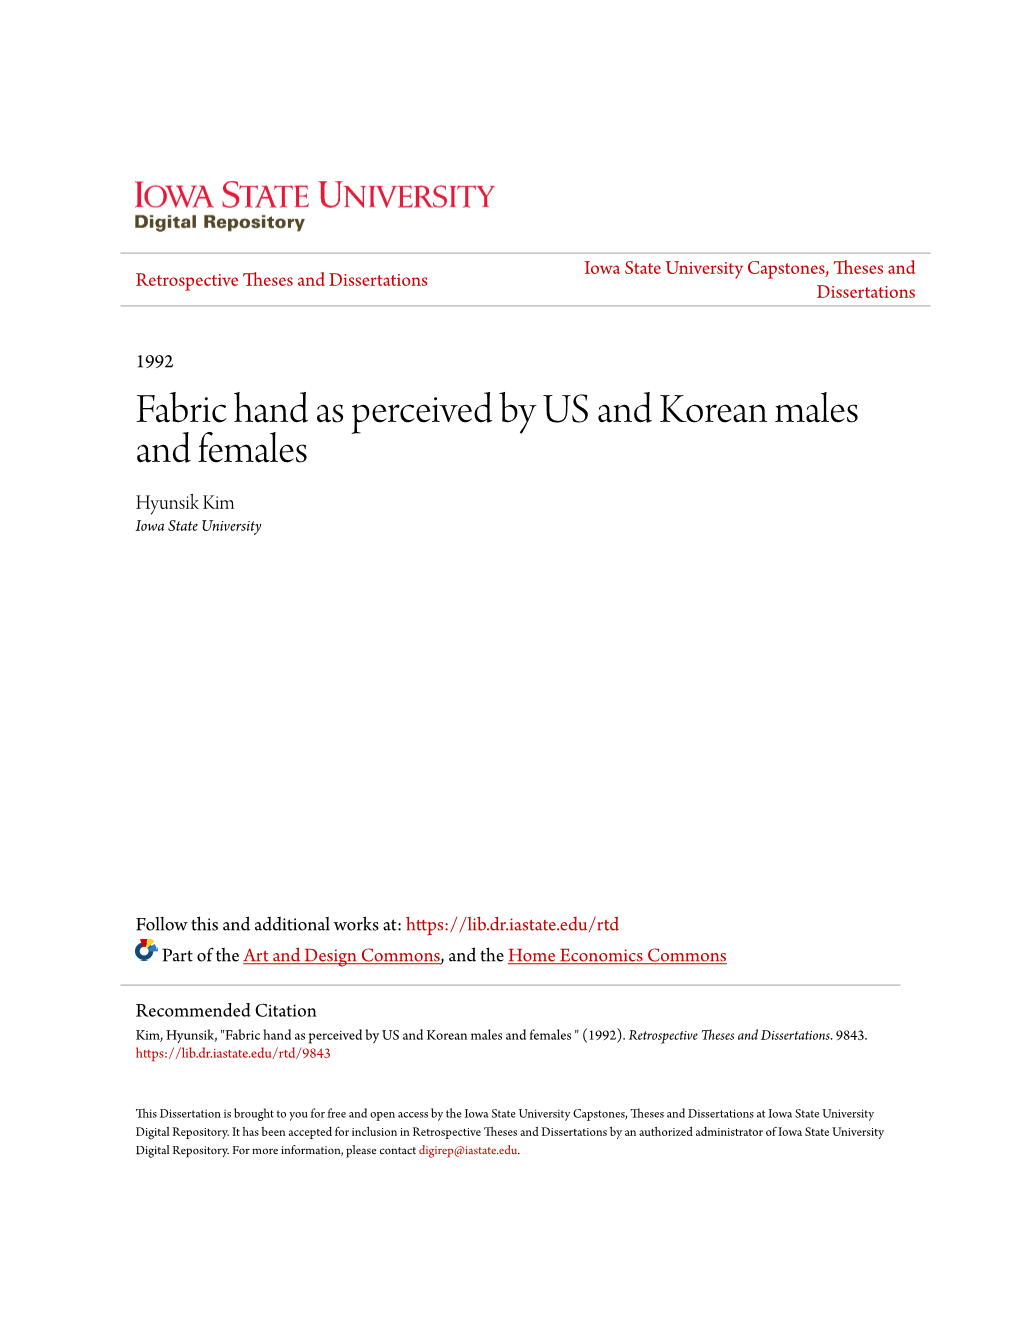 Fabric Hand As Perceived by US and Korean Males and Females Hyunsik Kim Iowa State University